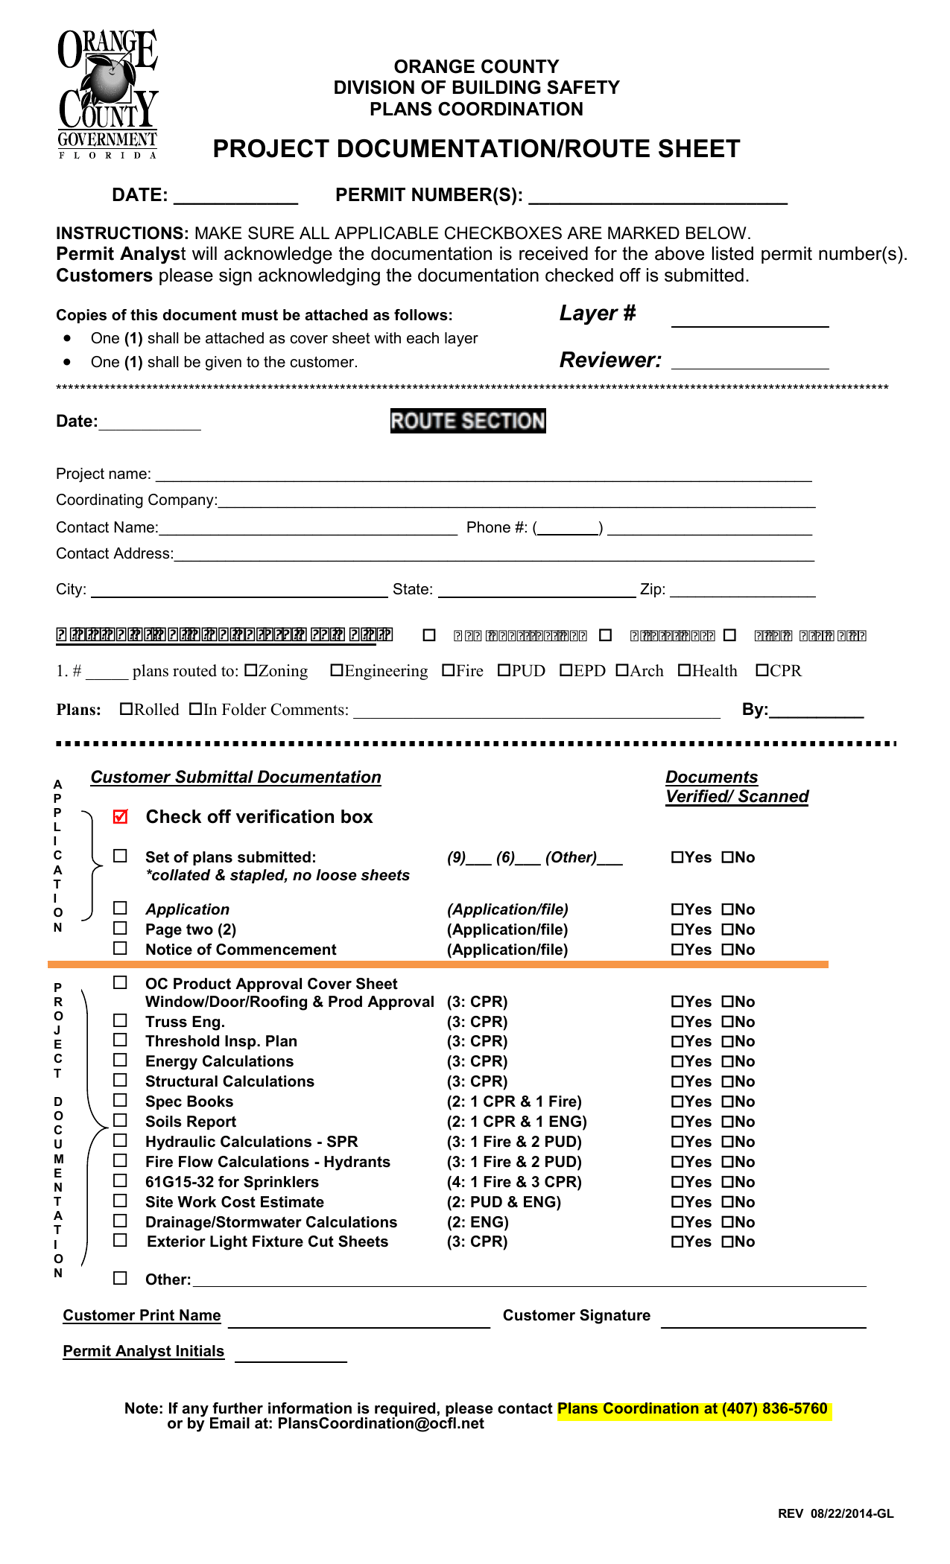 Project Documentation / Route Sheet - Orange County, Florida, Page 1